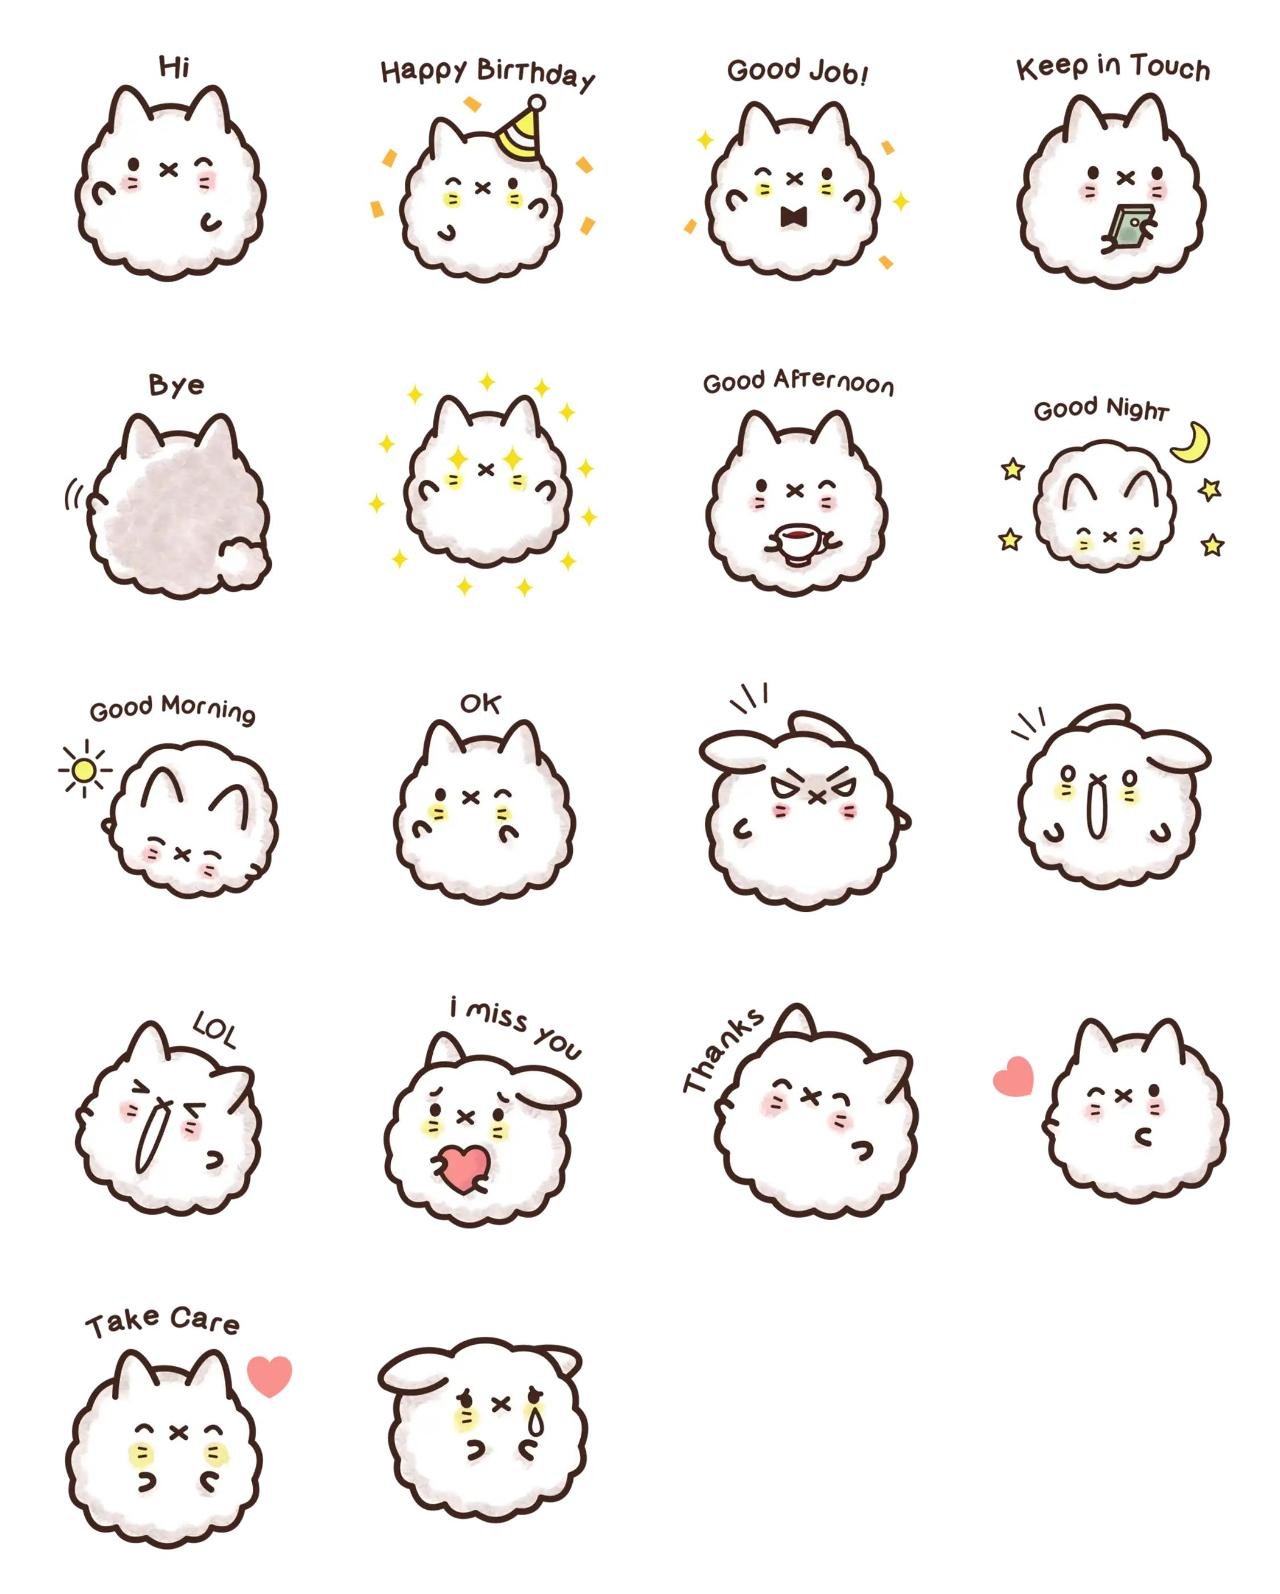 Popcorn Cat Animals,Food/Drink sticker pack for Whatsapp, Telegram, Signal, and others chatting and message apps